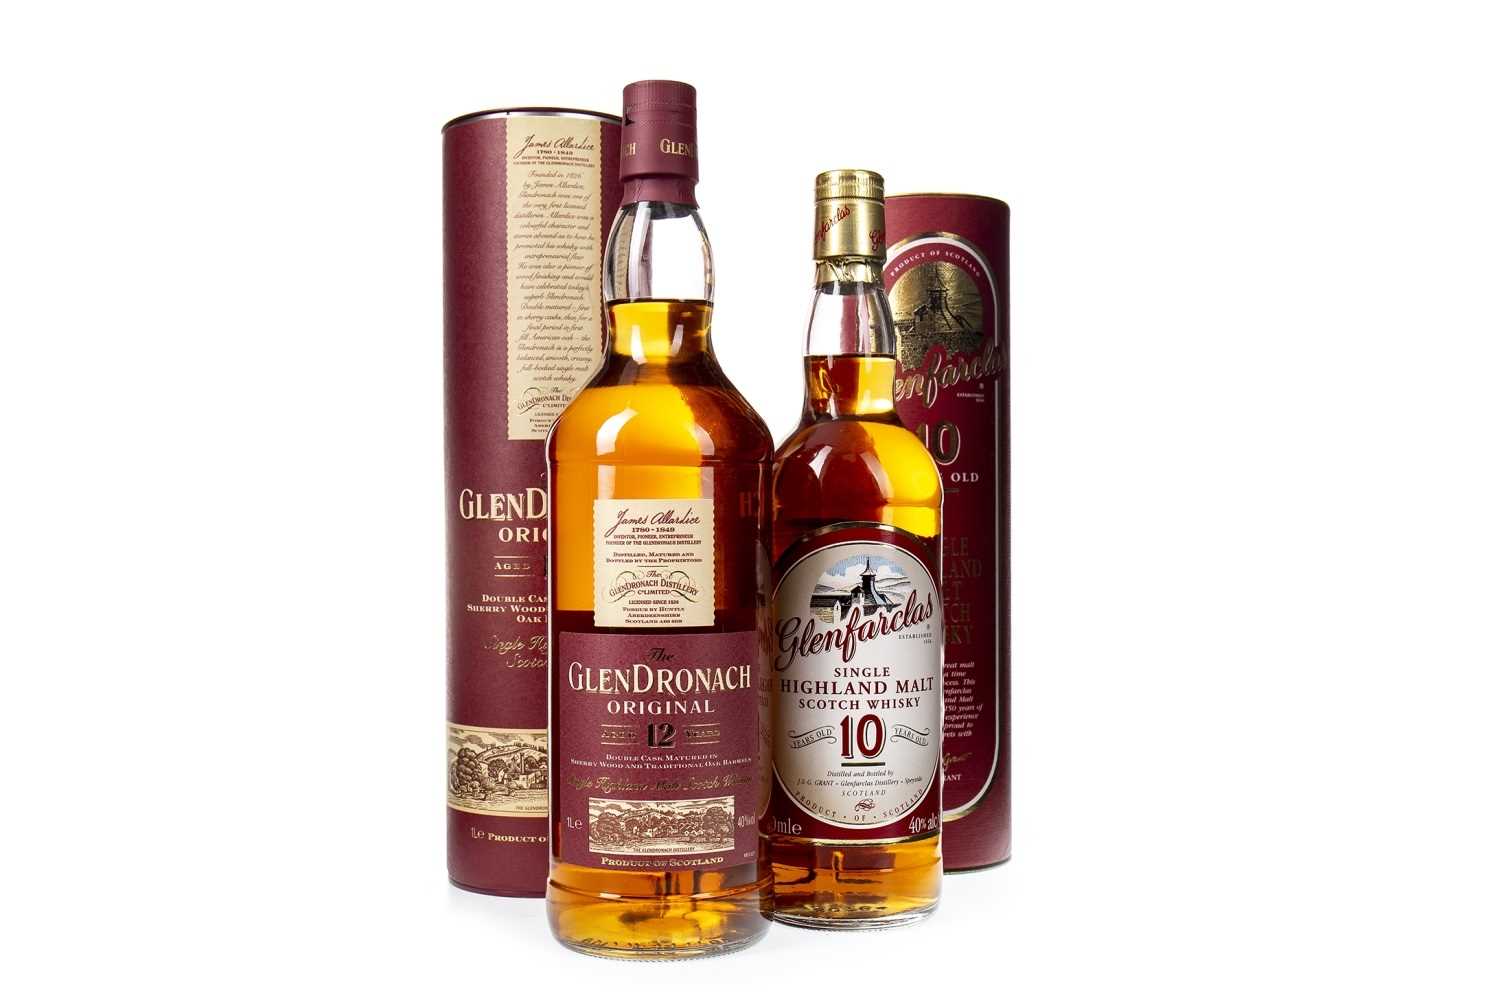 Lot 313 - GLENDRONACH ORIGINAL AGED 12 YEARS AND GLENFARCLAS 10 YEARS OLD